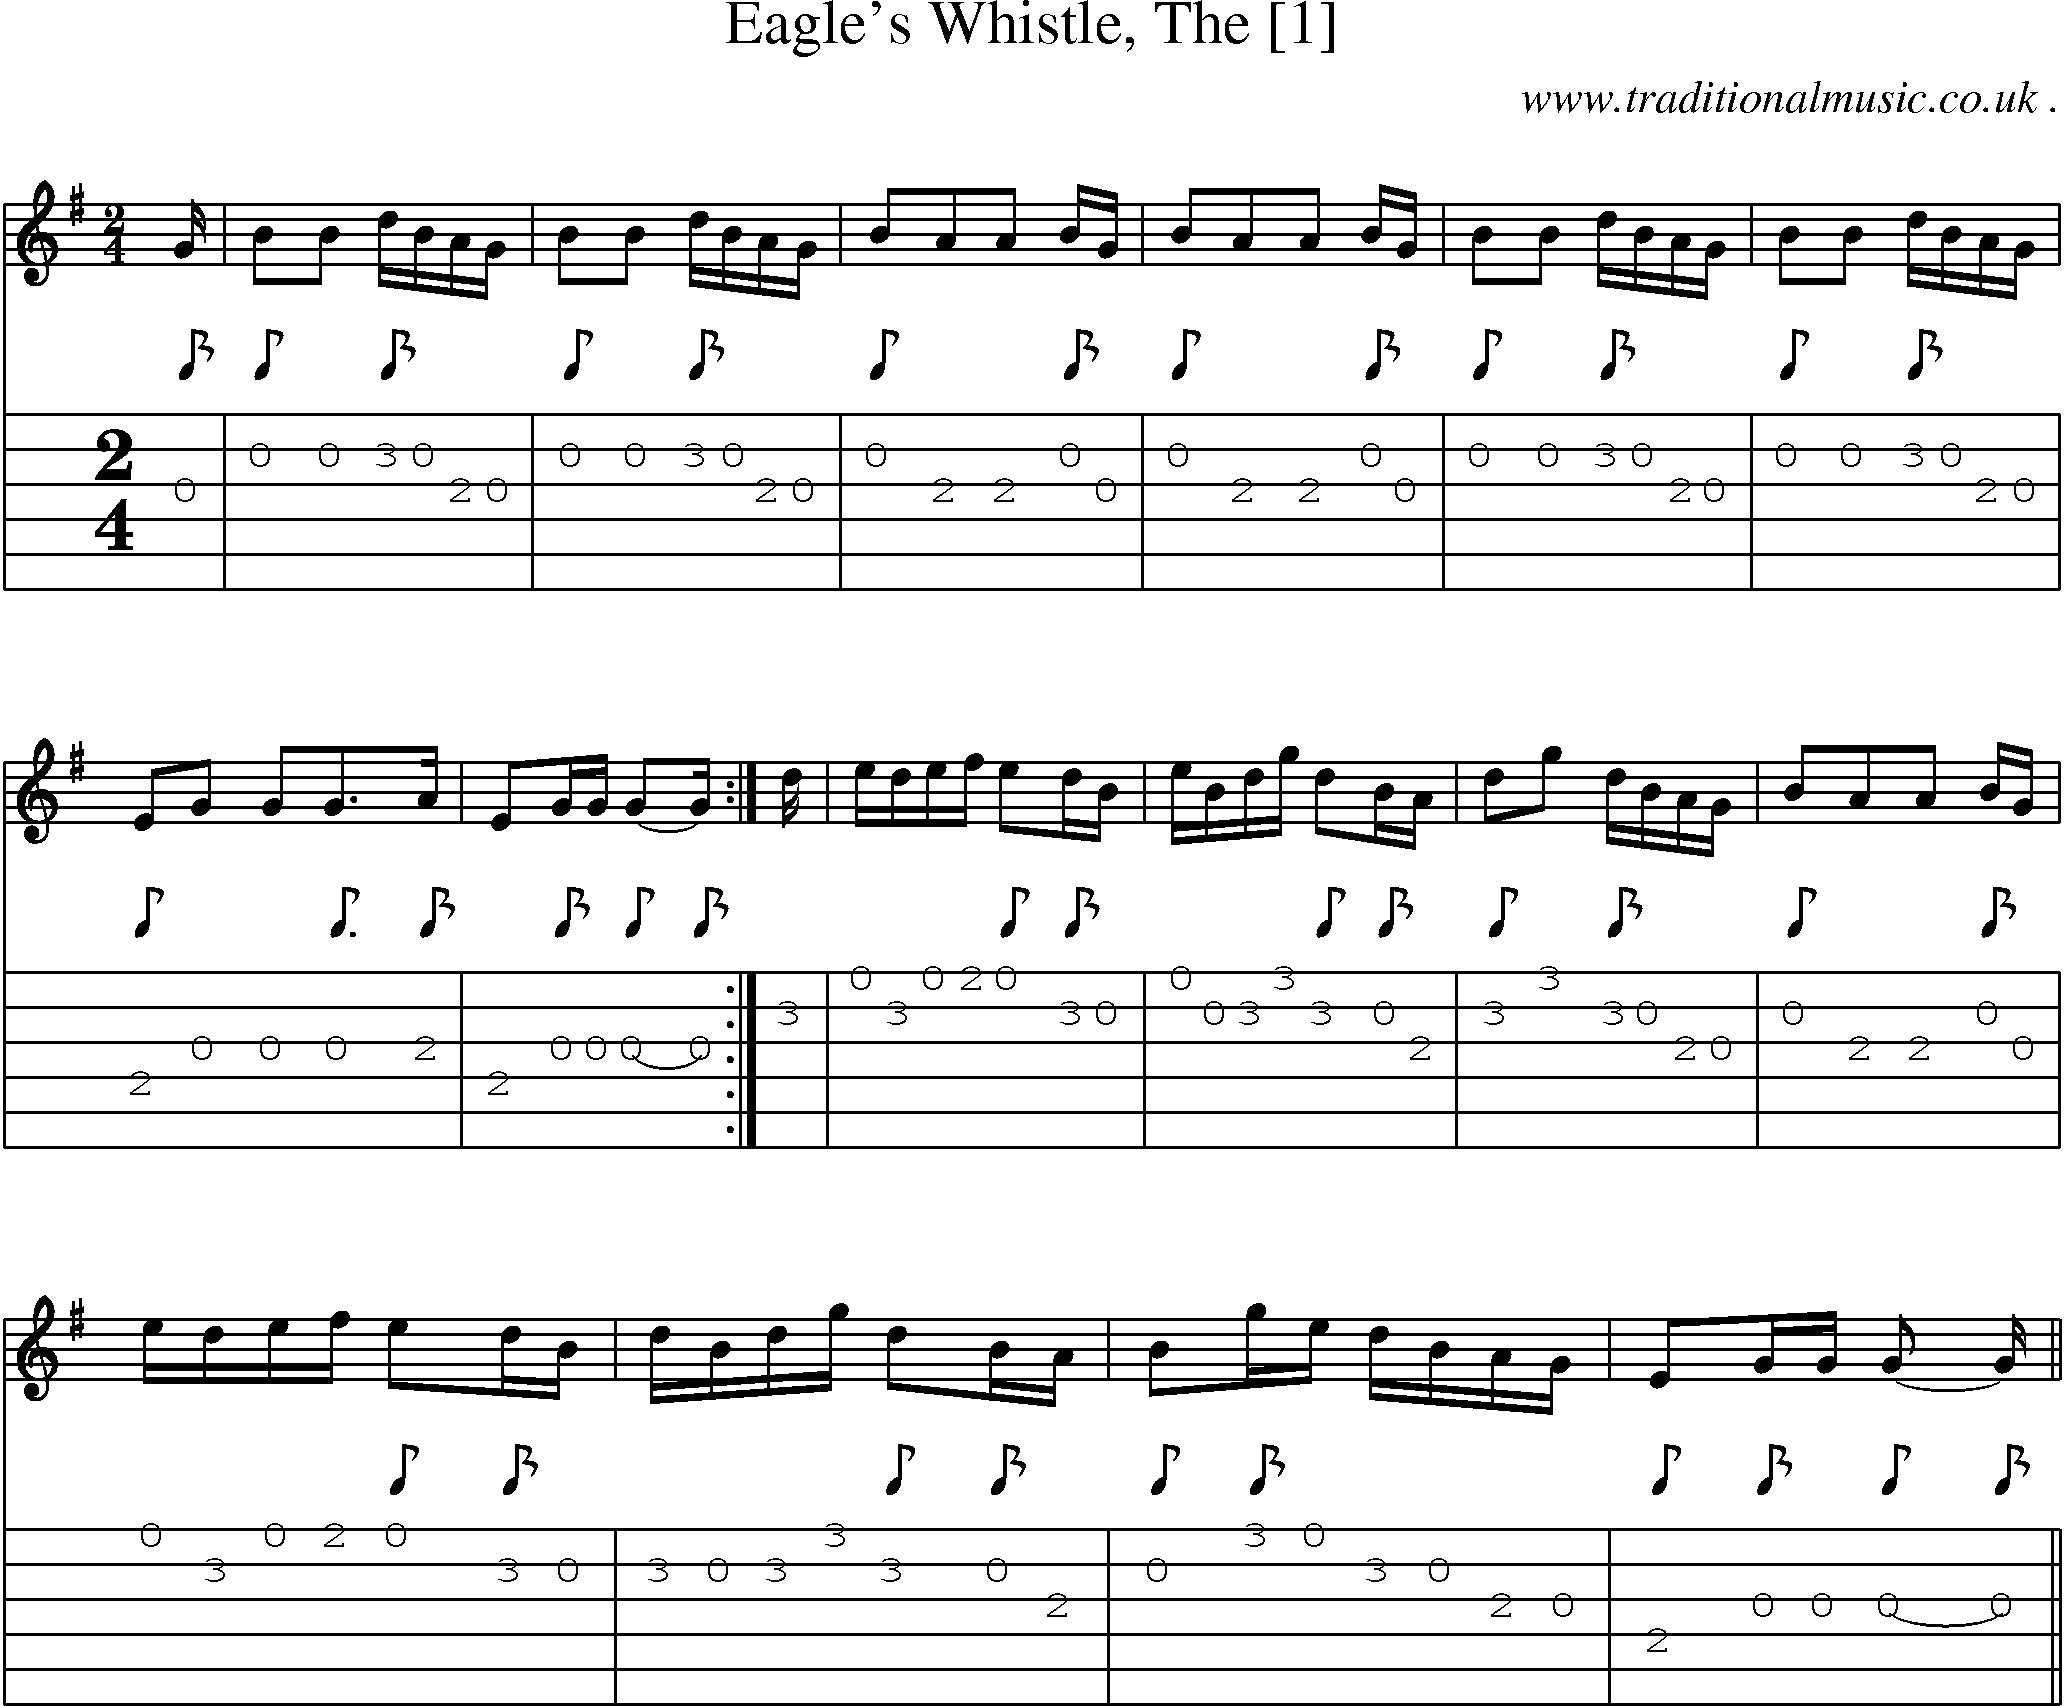 Sheet-music  score, Chords and Guitar Tabs for Eagles Whistle The [1]